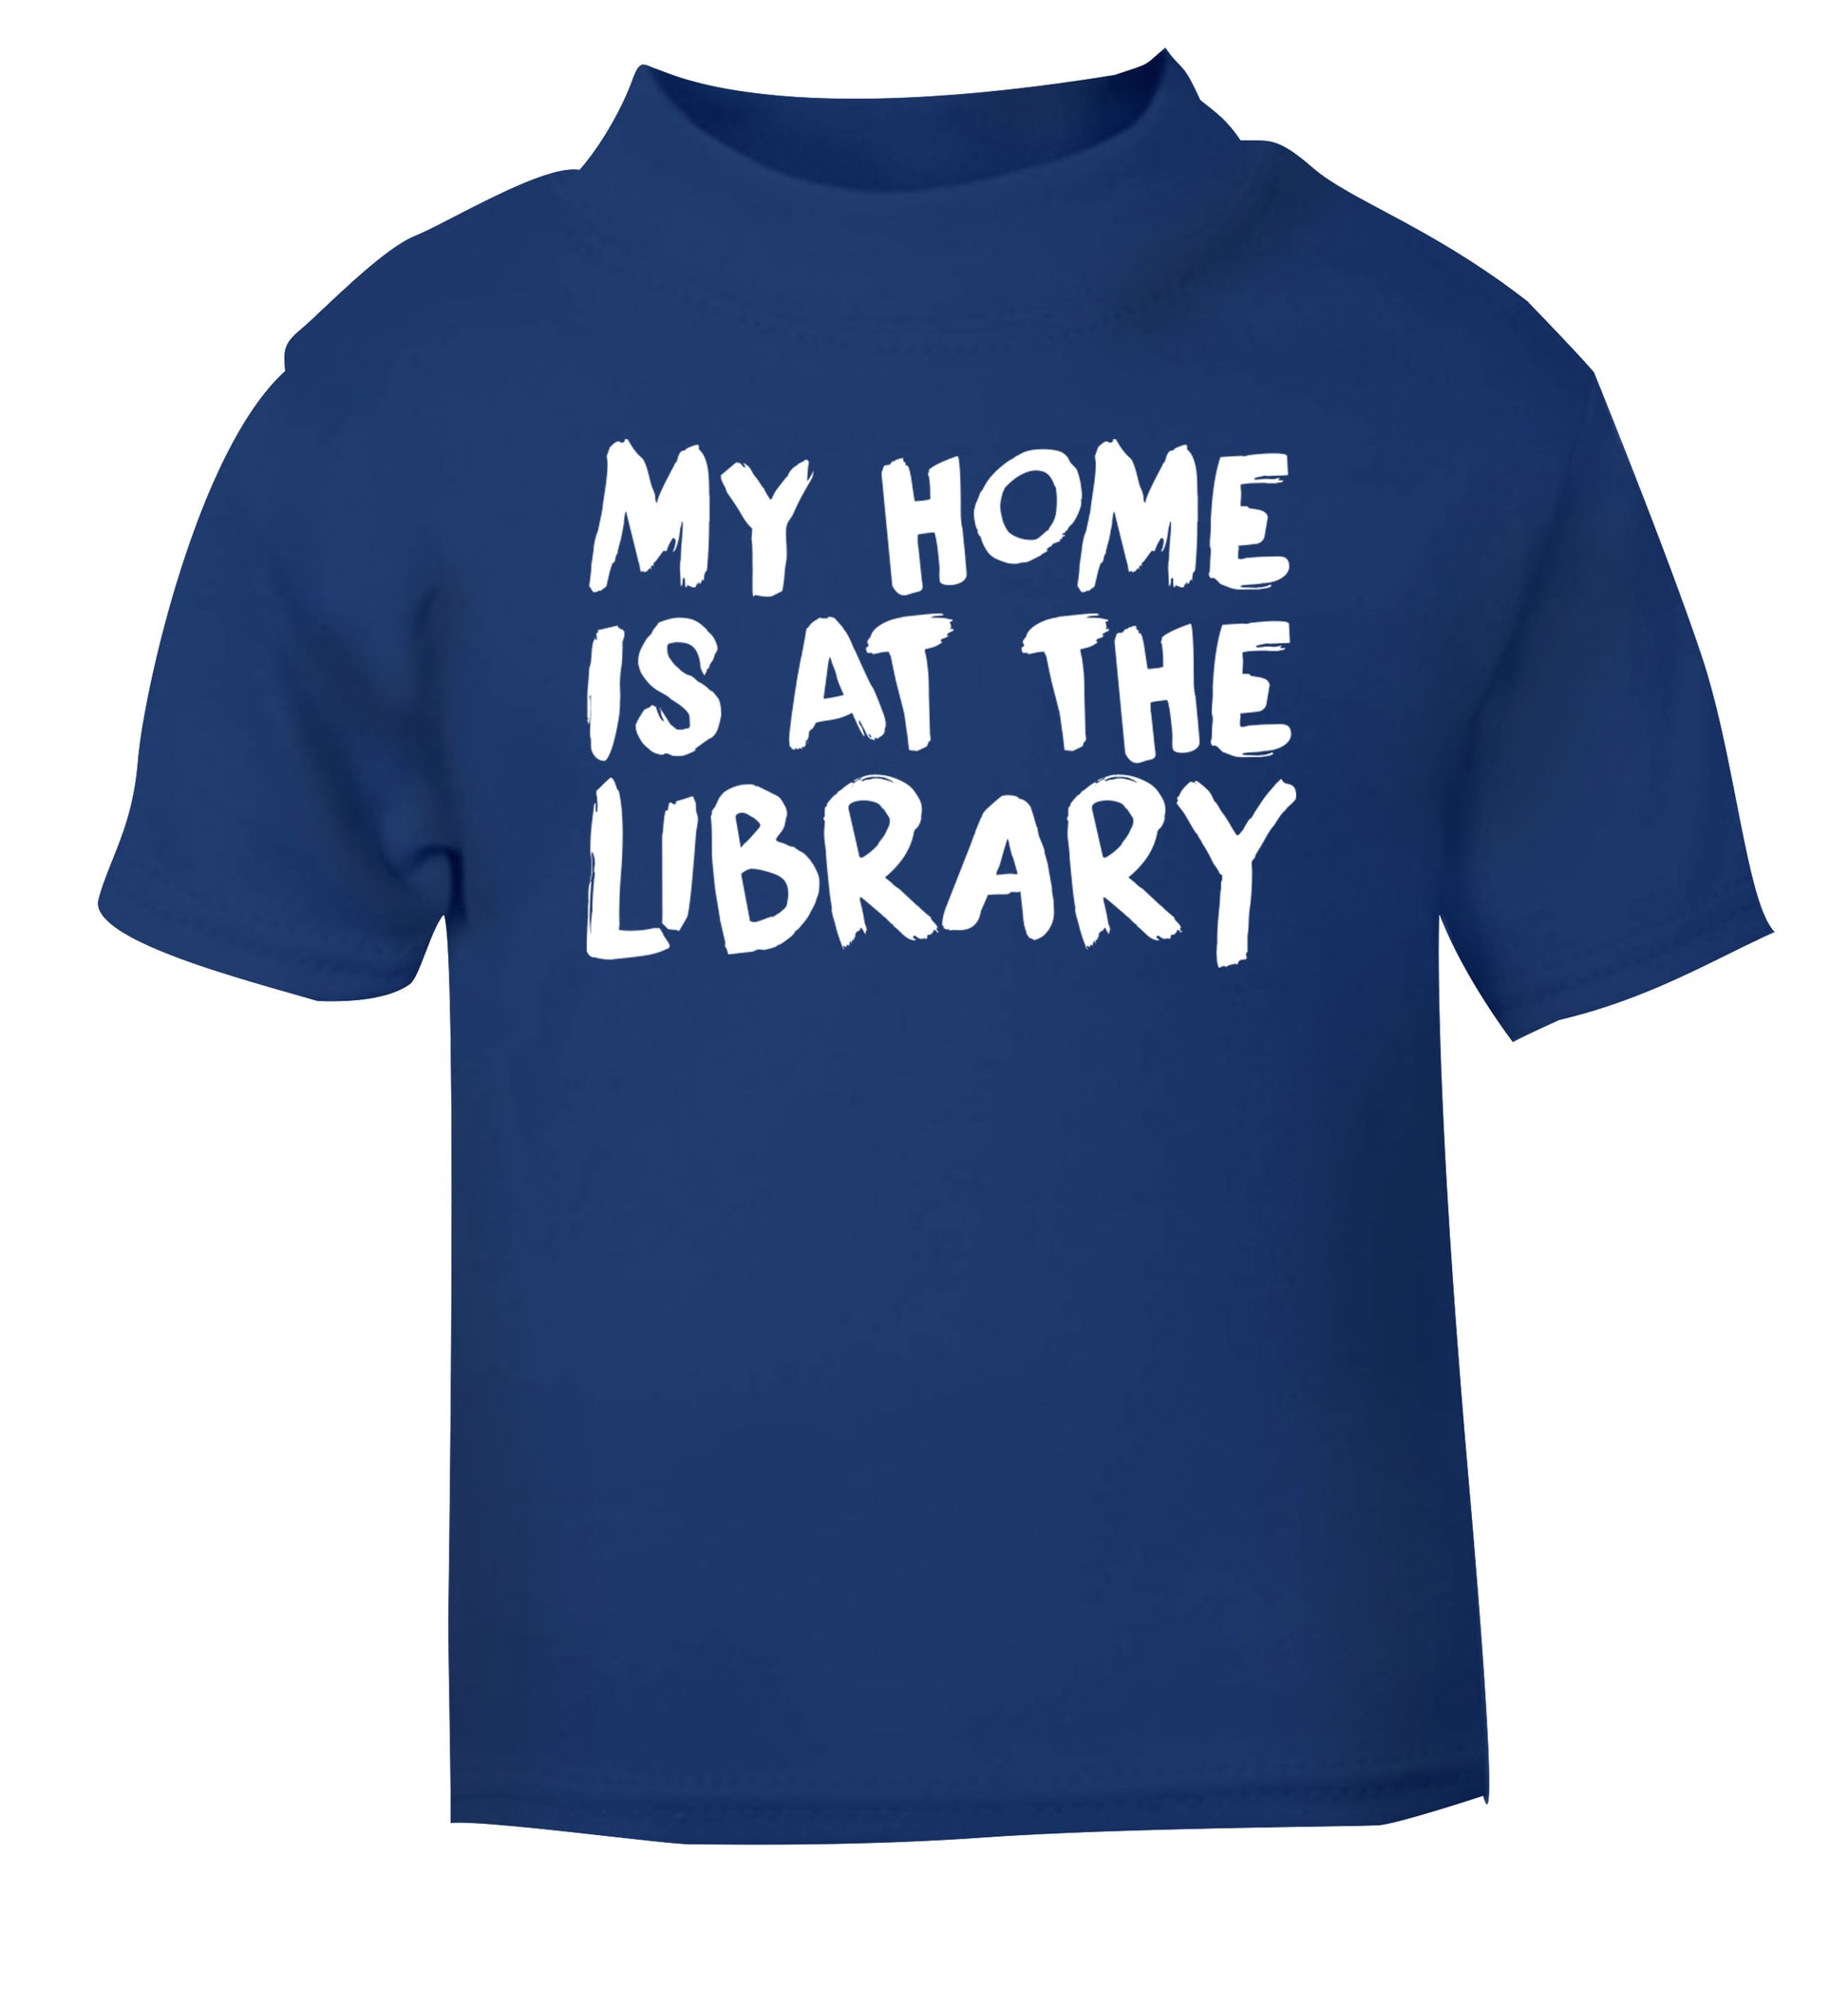 My home is at the library blue Baby Toddler Tshirt 2 Years